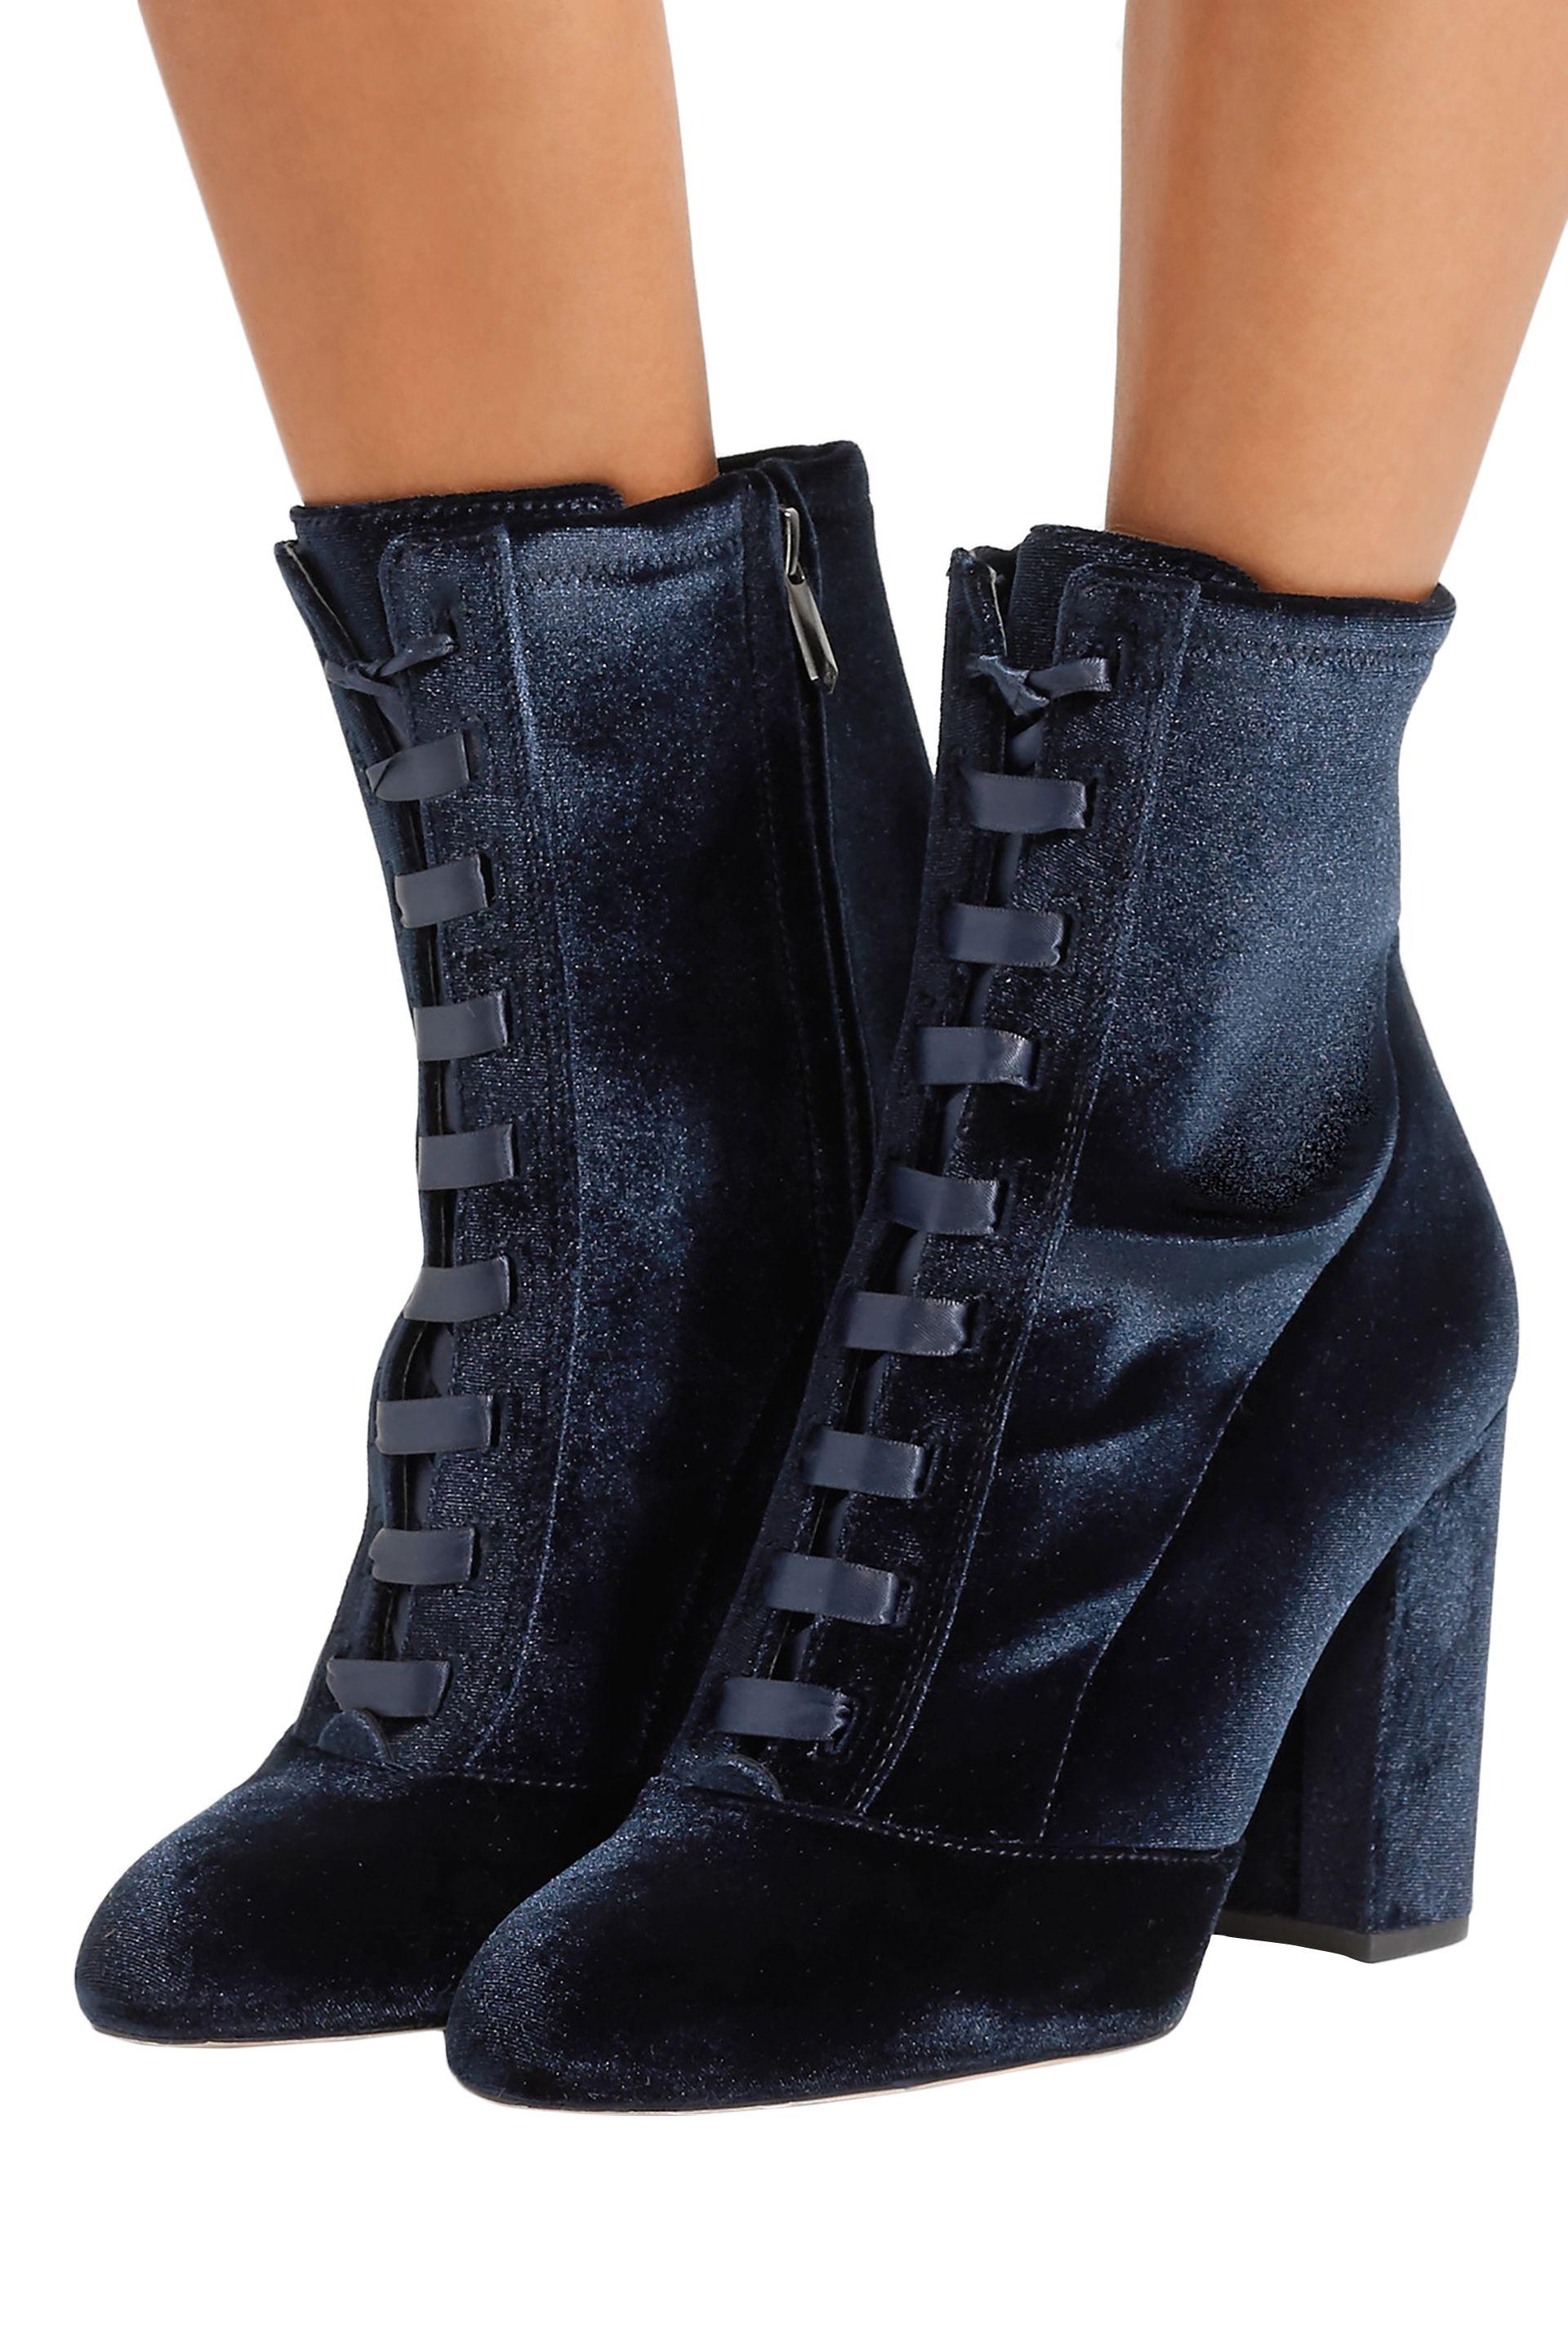 Sam Edelman Clementine Lace-up Velvet Ankle Boots Navy in Blue - Lyst